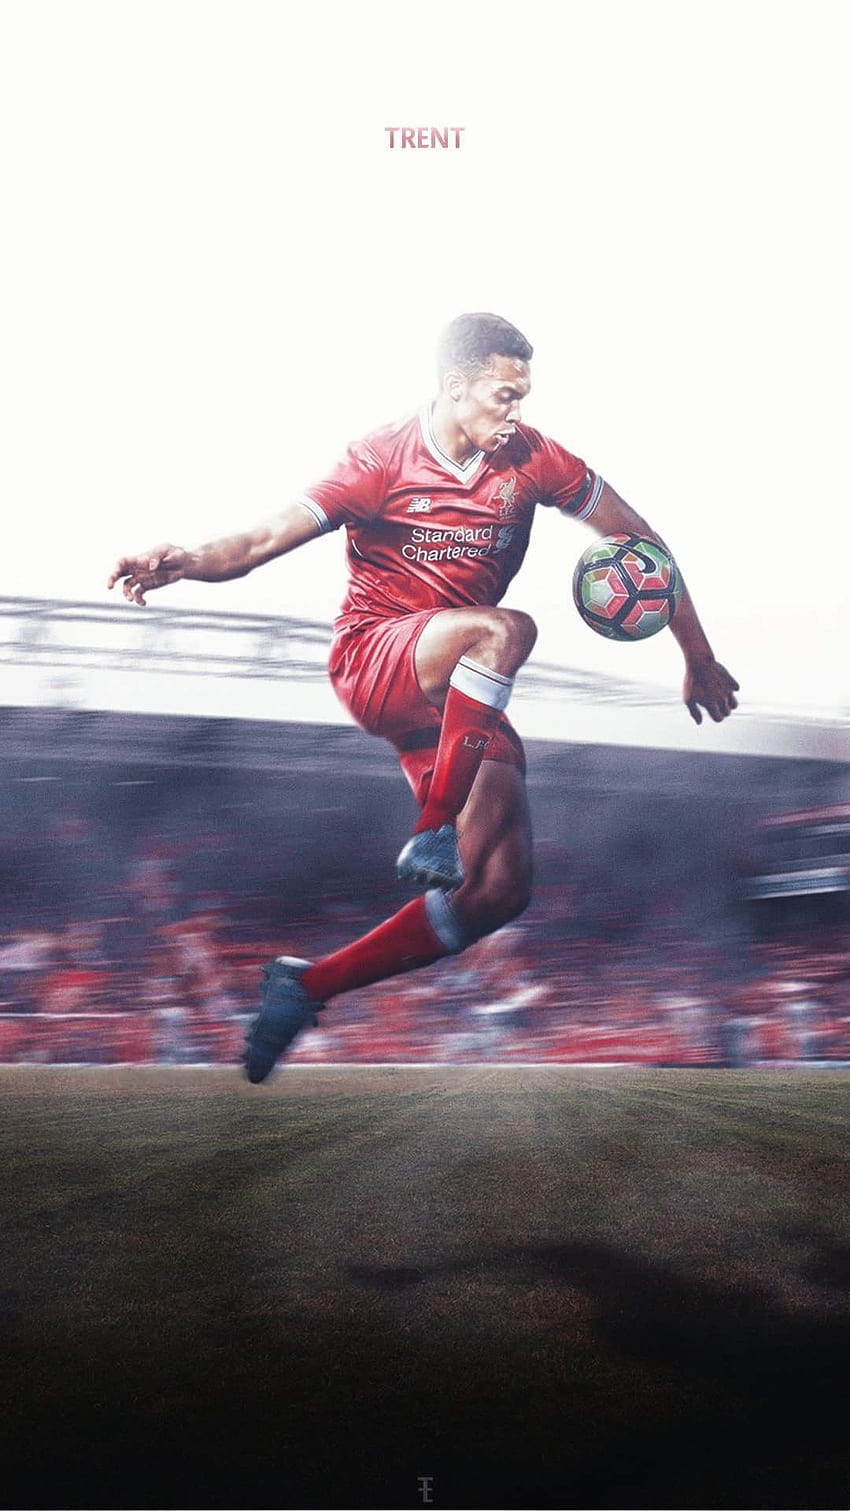 Alexander Arnold Mobile At Liverpool FC Liverpool Core, Trent Alexander-Arnold Fond d'écran de téléphone HD